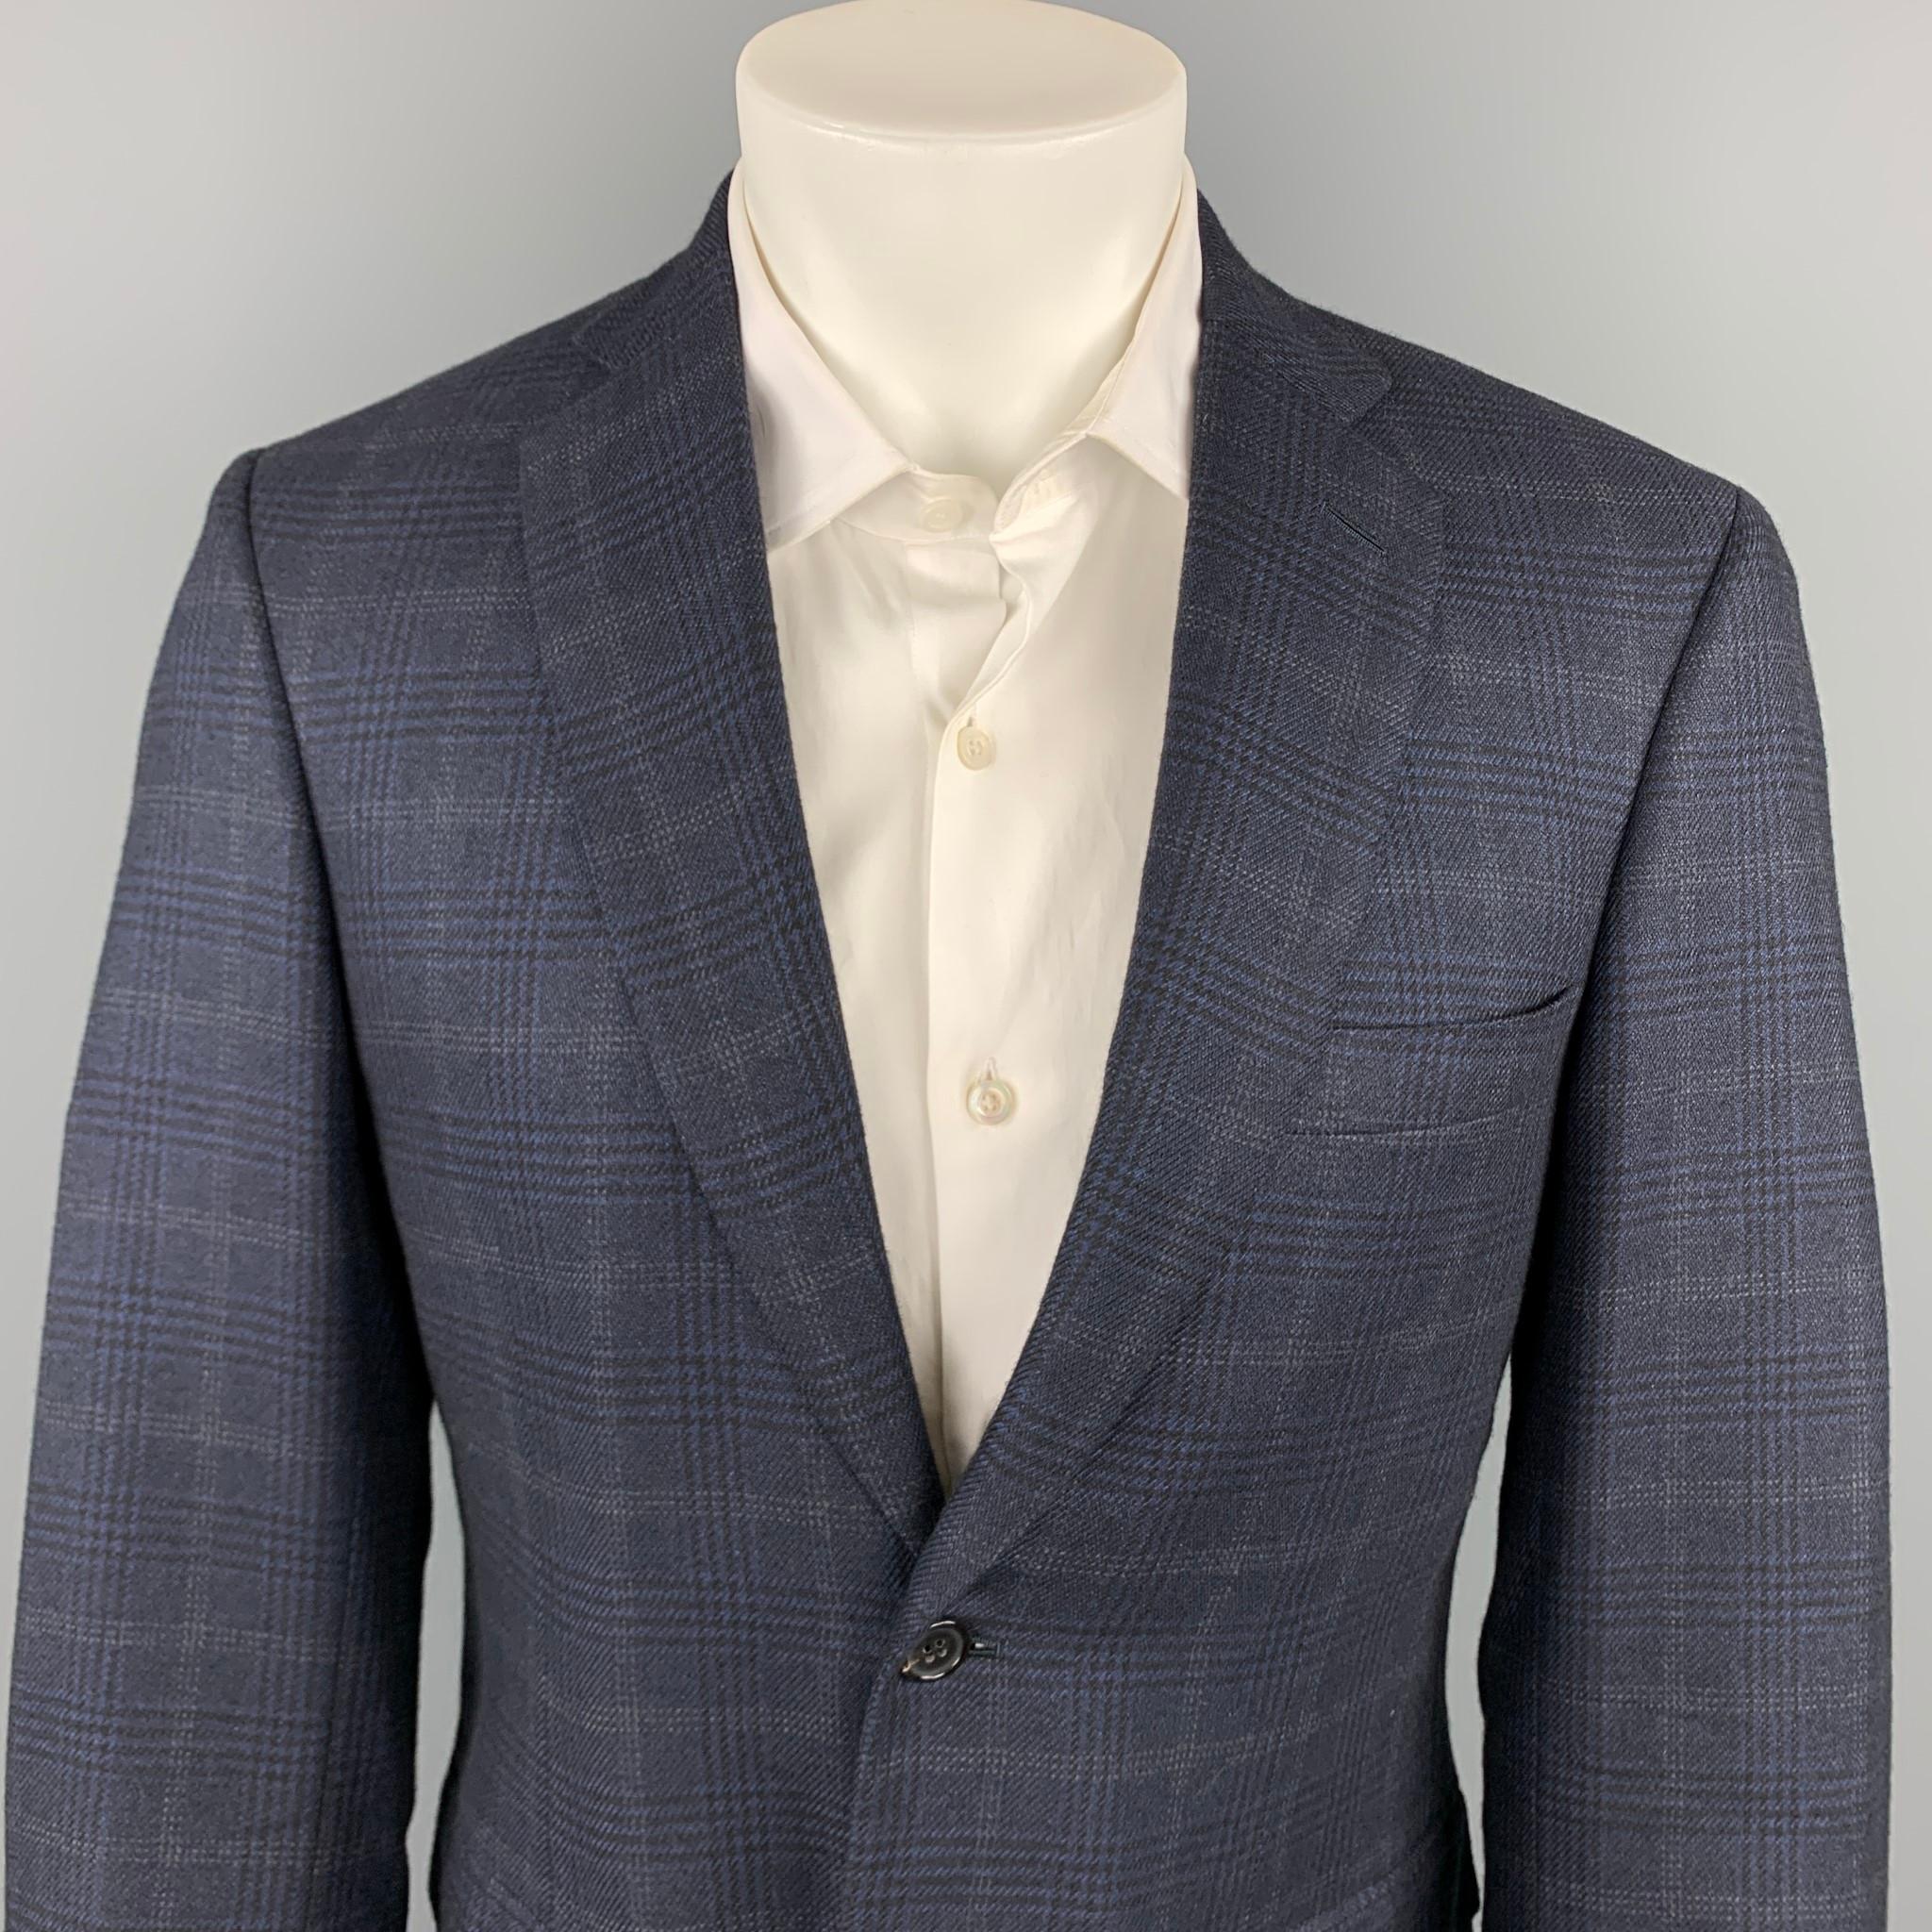 BRIONI custom sport coat comes in a navy plaid silk / wool with a full monogram print liner featuring a notch lapel. flap pockets, and a two button closure. Made in Italy.

Very Good Pre-Owned Condition.
Marked: 39

Measurements:

Shoulder: 18.5